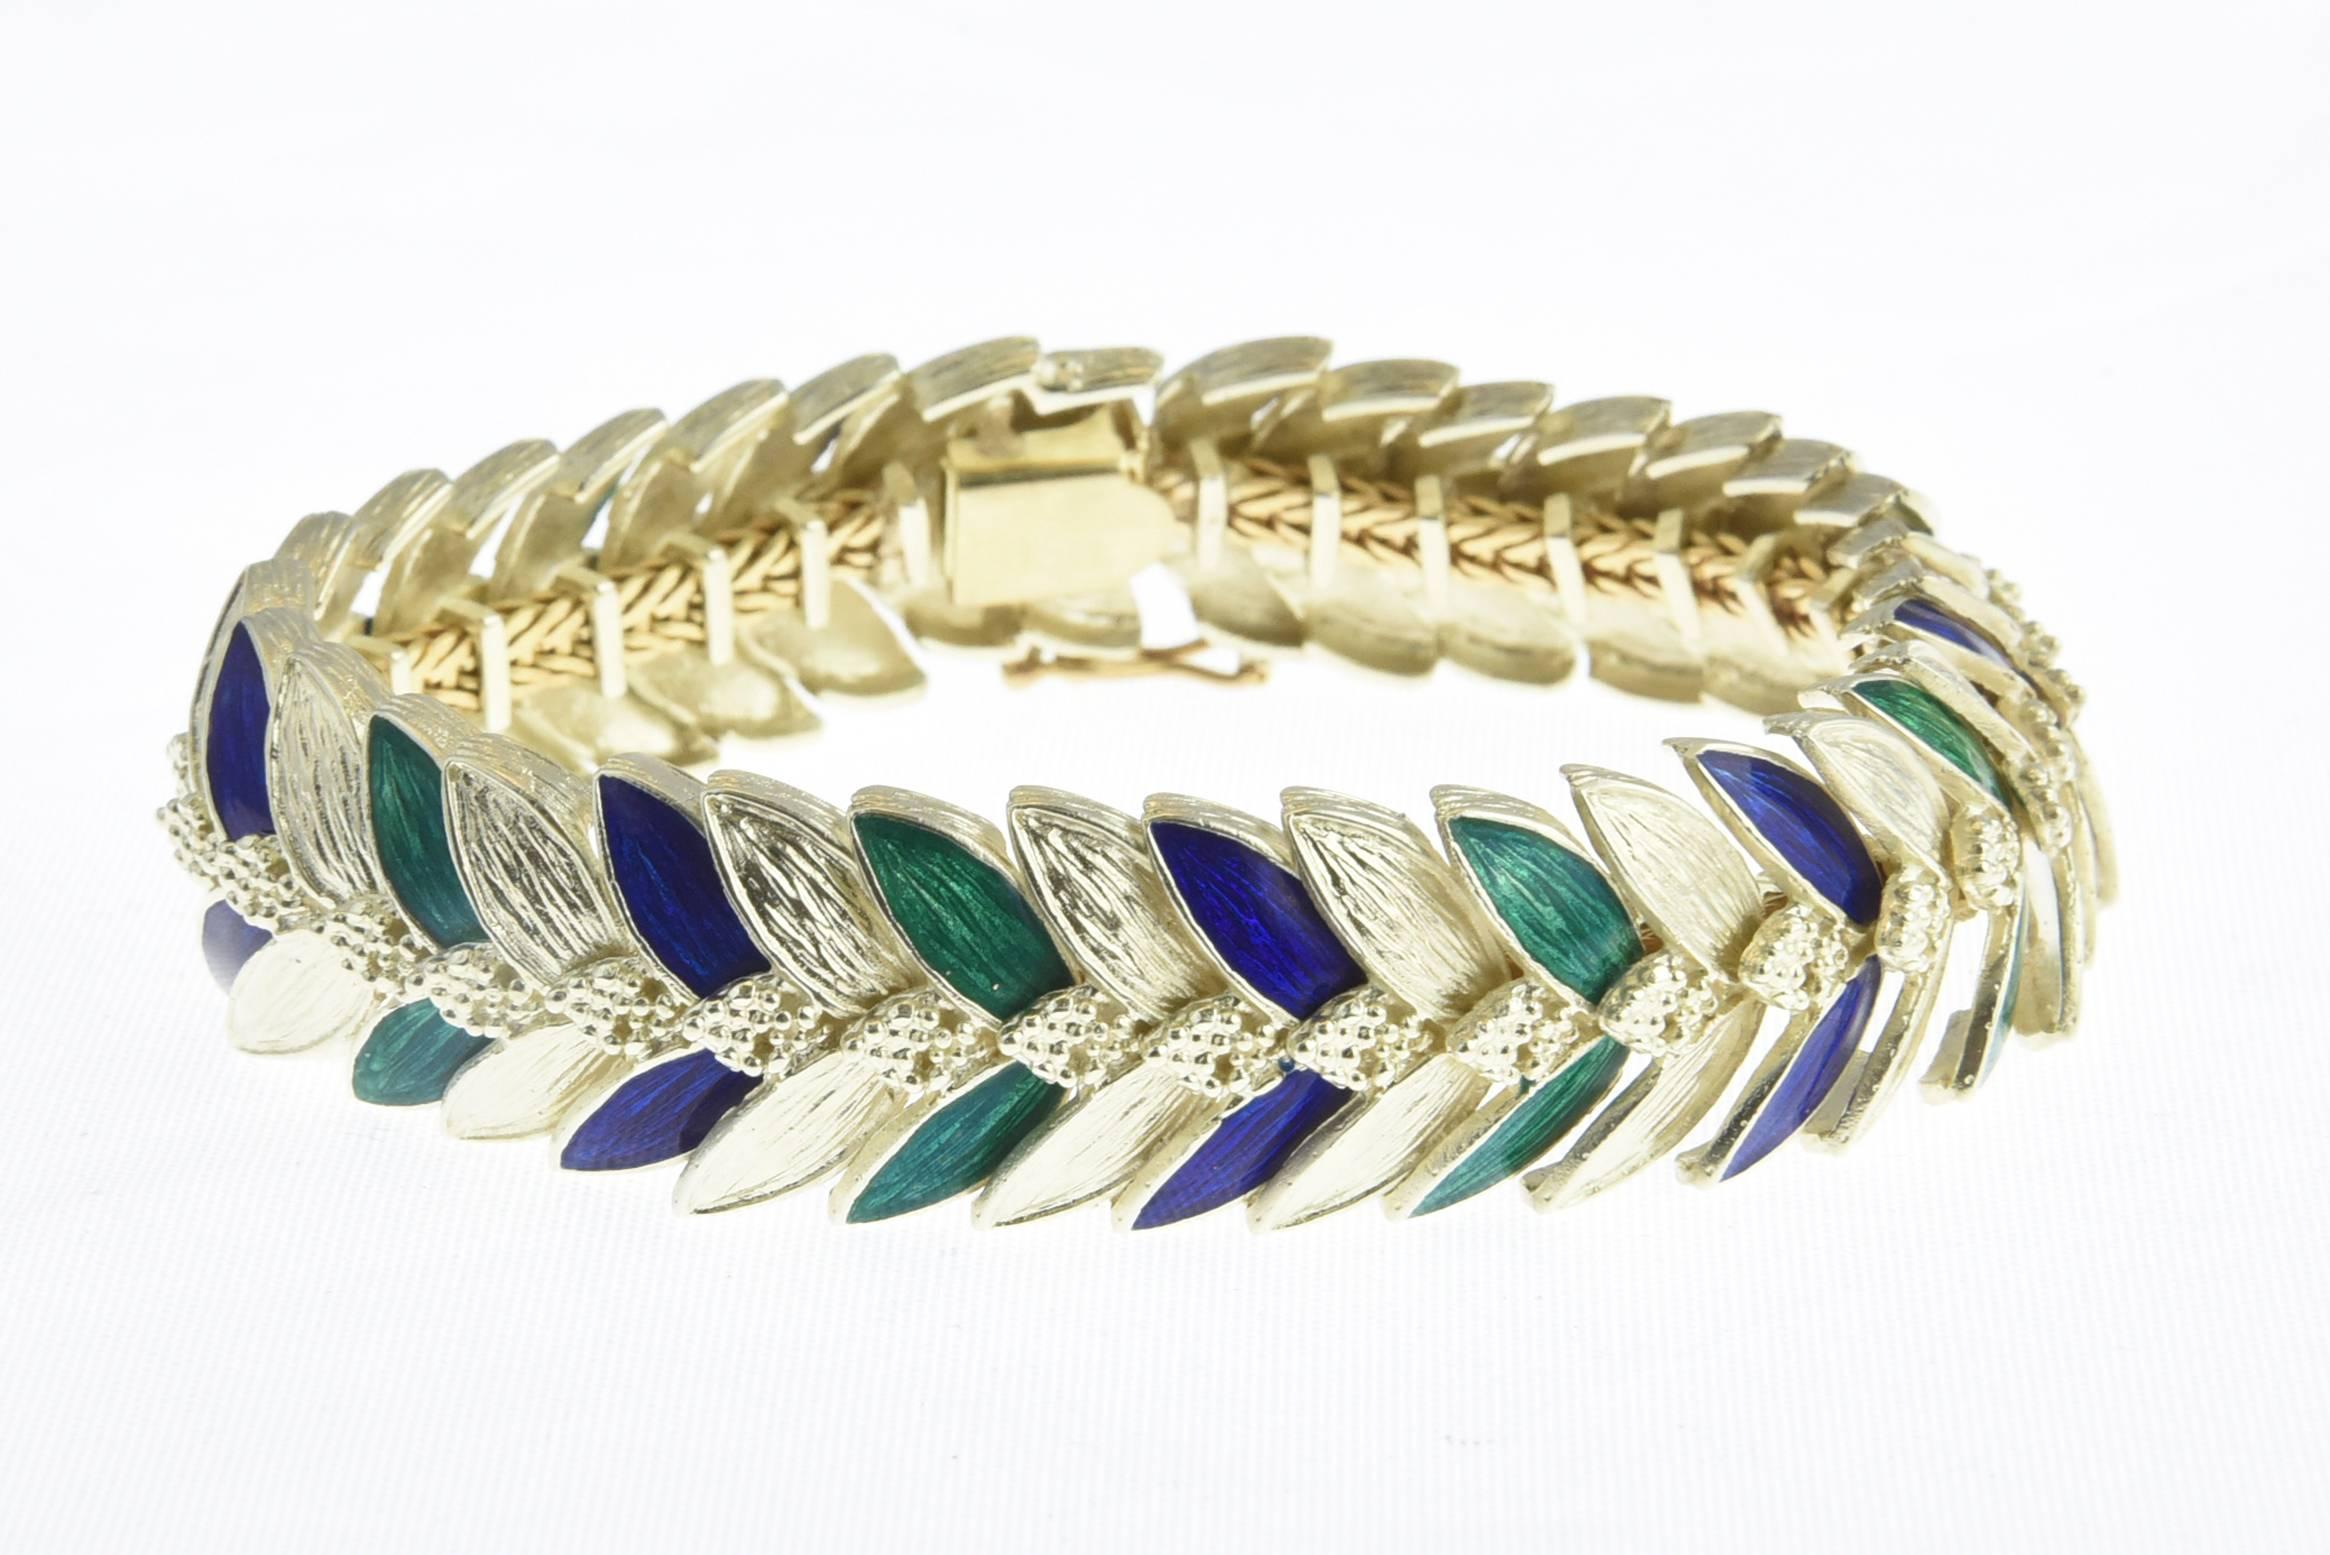 14K gold bracelet accented with etched gold and blue and green enameled leaves. Marked: 14K. 